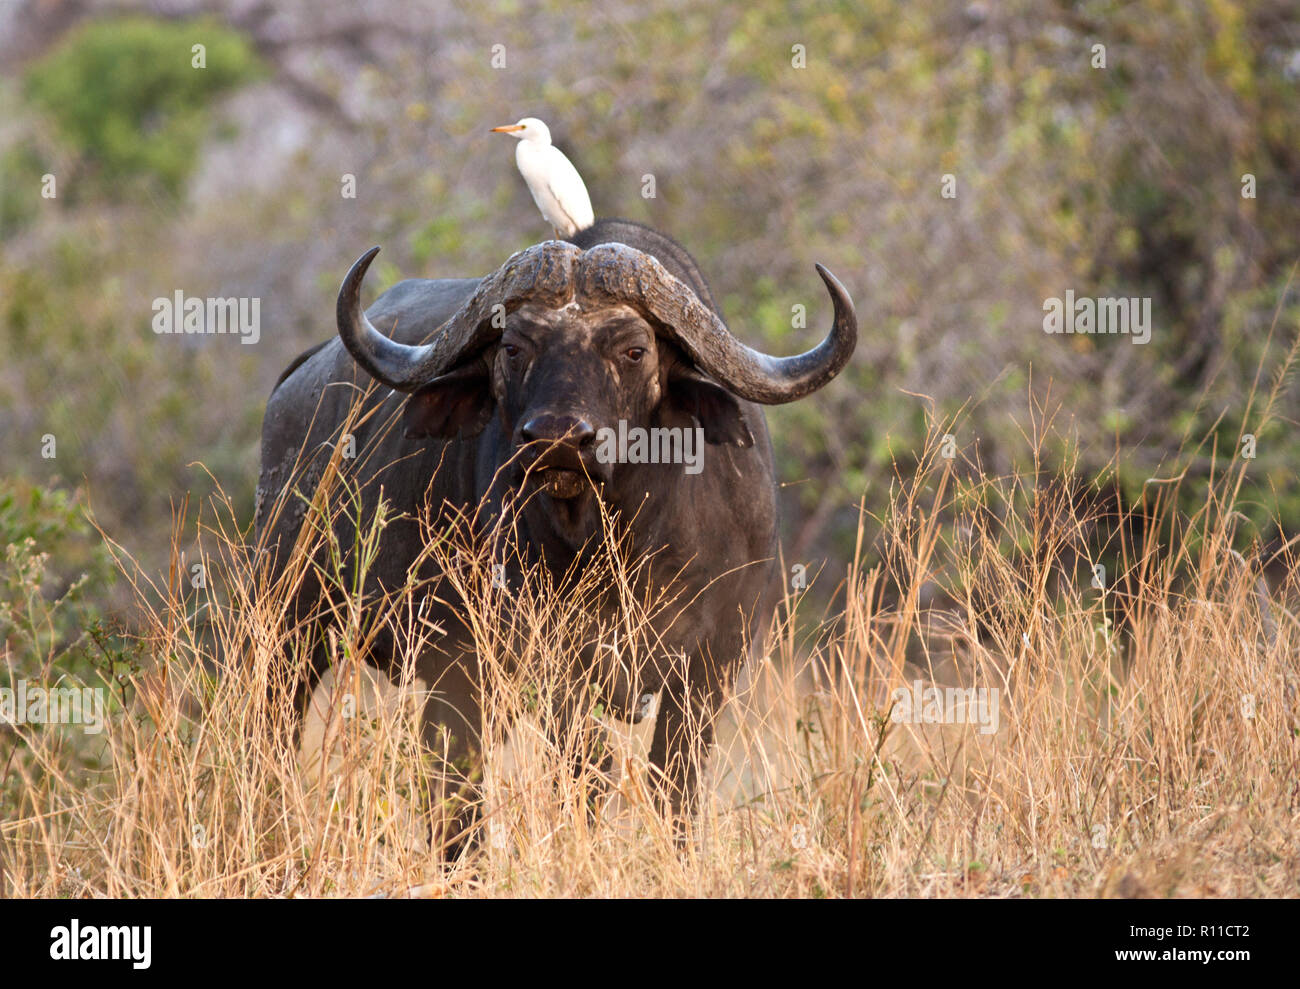 A wary old buffalo bull stares at the vehicle as a cattle Egret hitches a ride on his back ever alert for insects being flushed up by their movement. Stock Photo